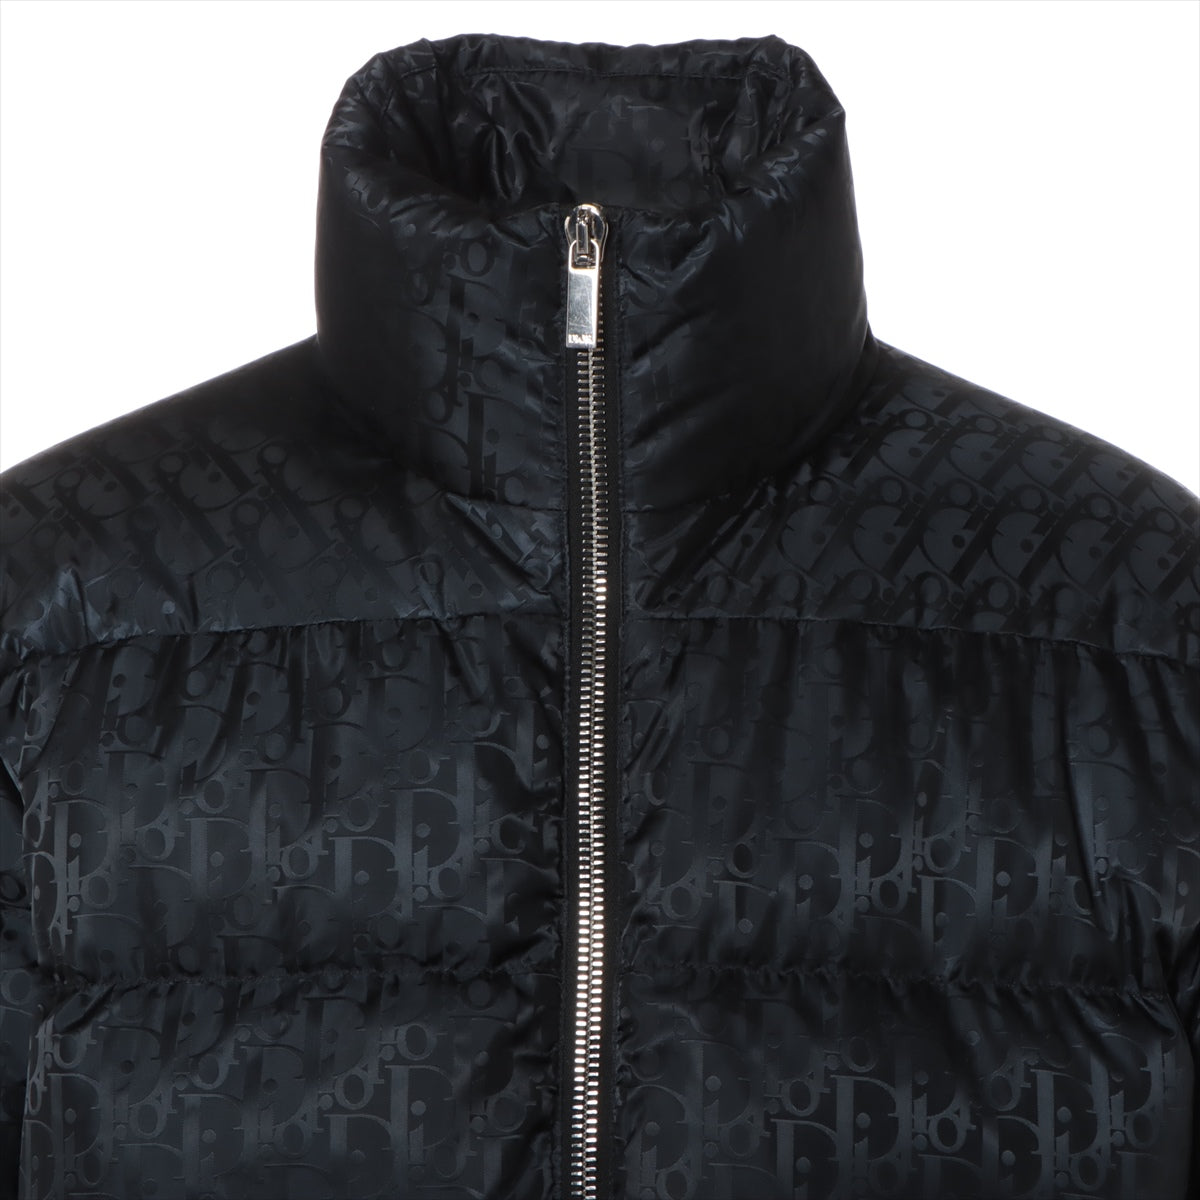 Dior Oblique 19AW Nylon Down jacket 46 Men's Navy Blue  943C449A4462 There is a scuff